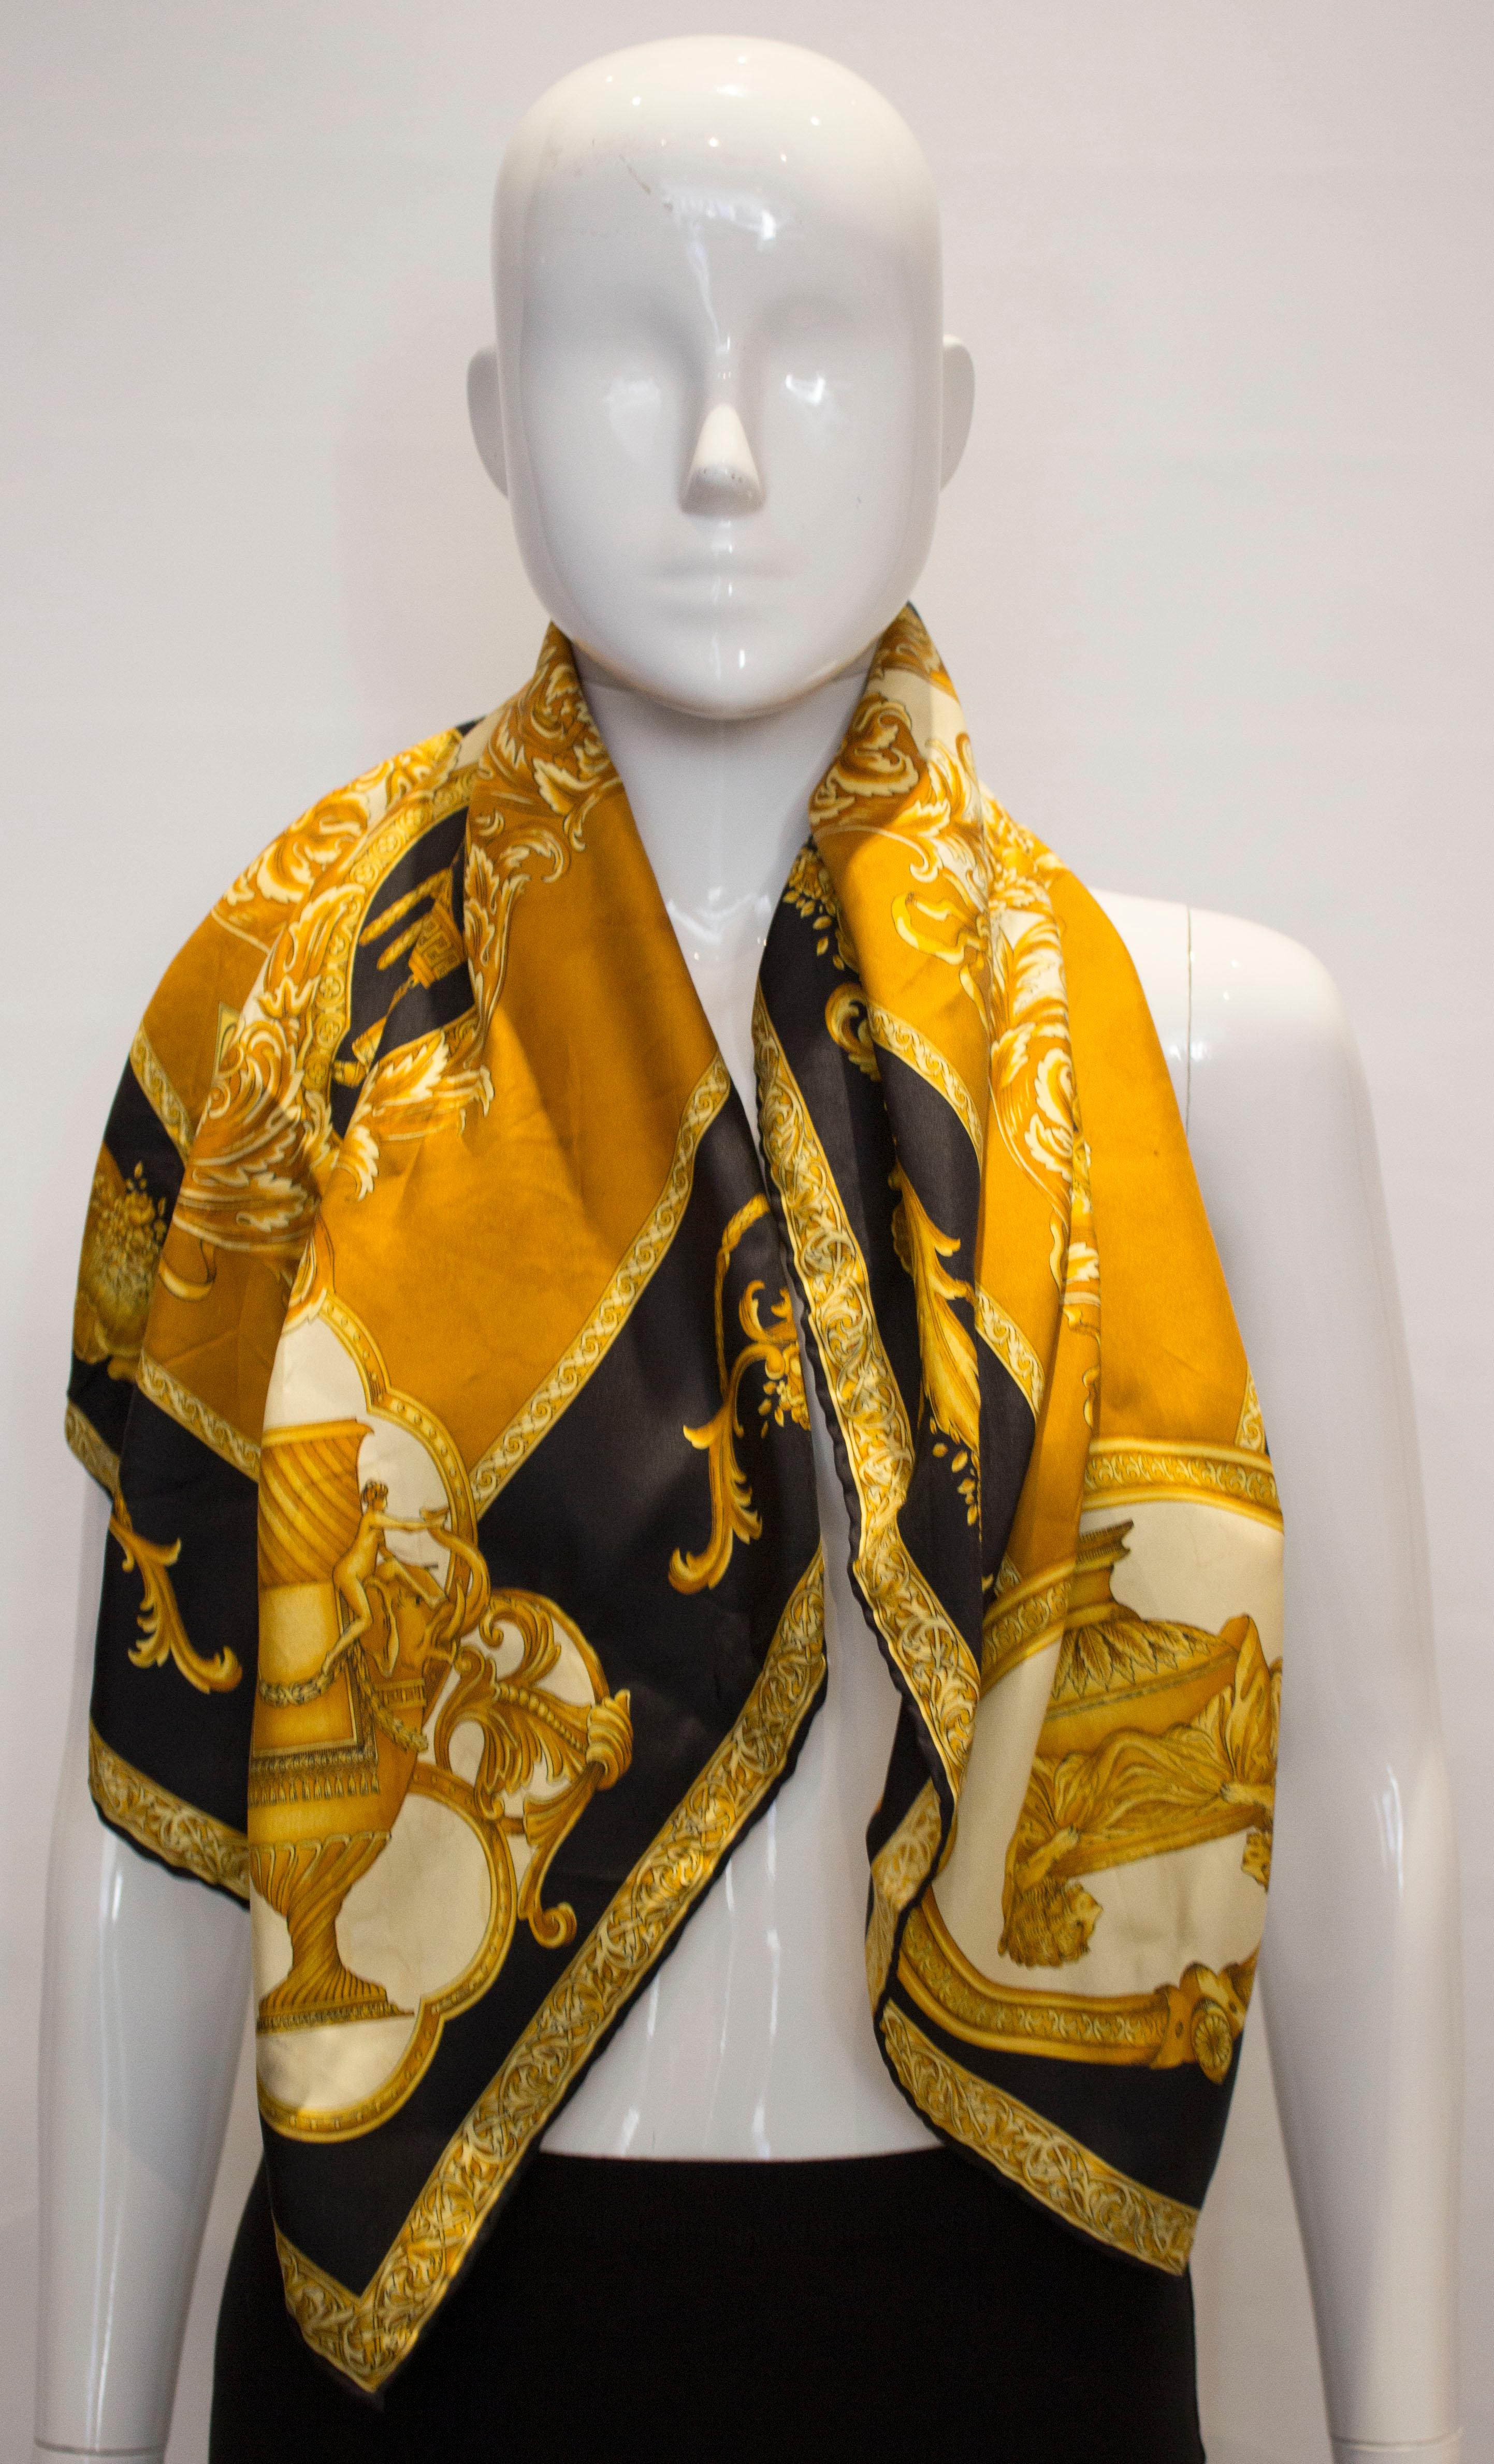 A stunning vintage silk scarf by Versace. The scarf has hand rolled edges and is in a gold, black and ivory design.